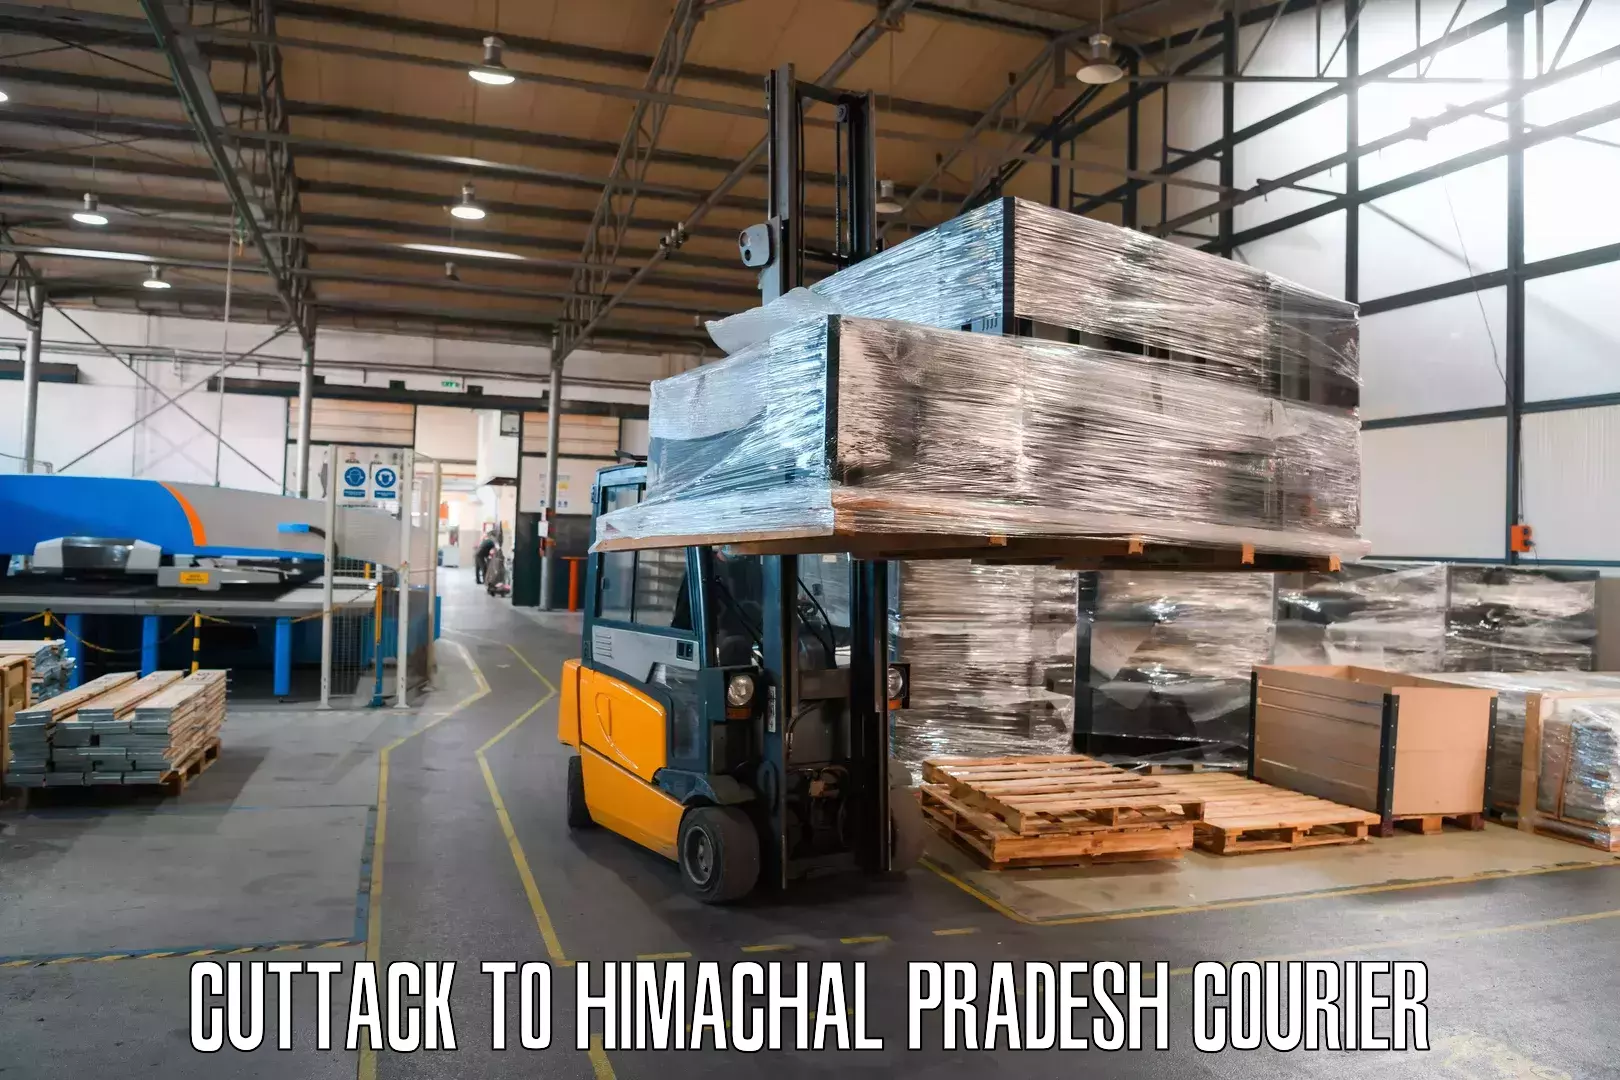 Global parcel delivery Cuttack to Surajpur Jhikla